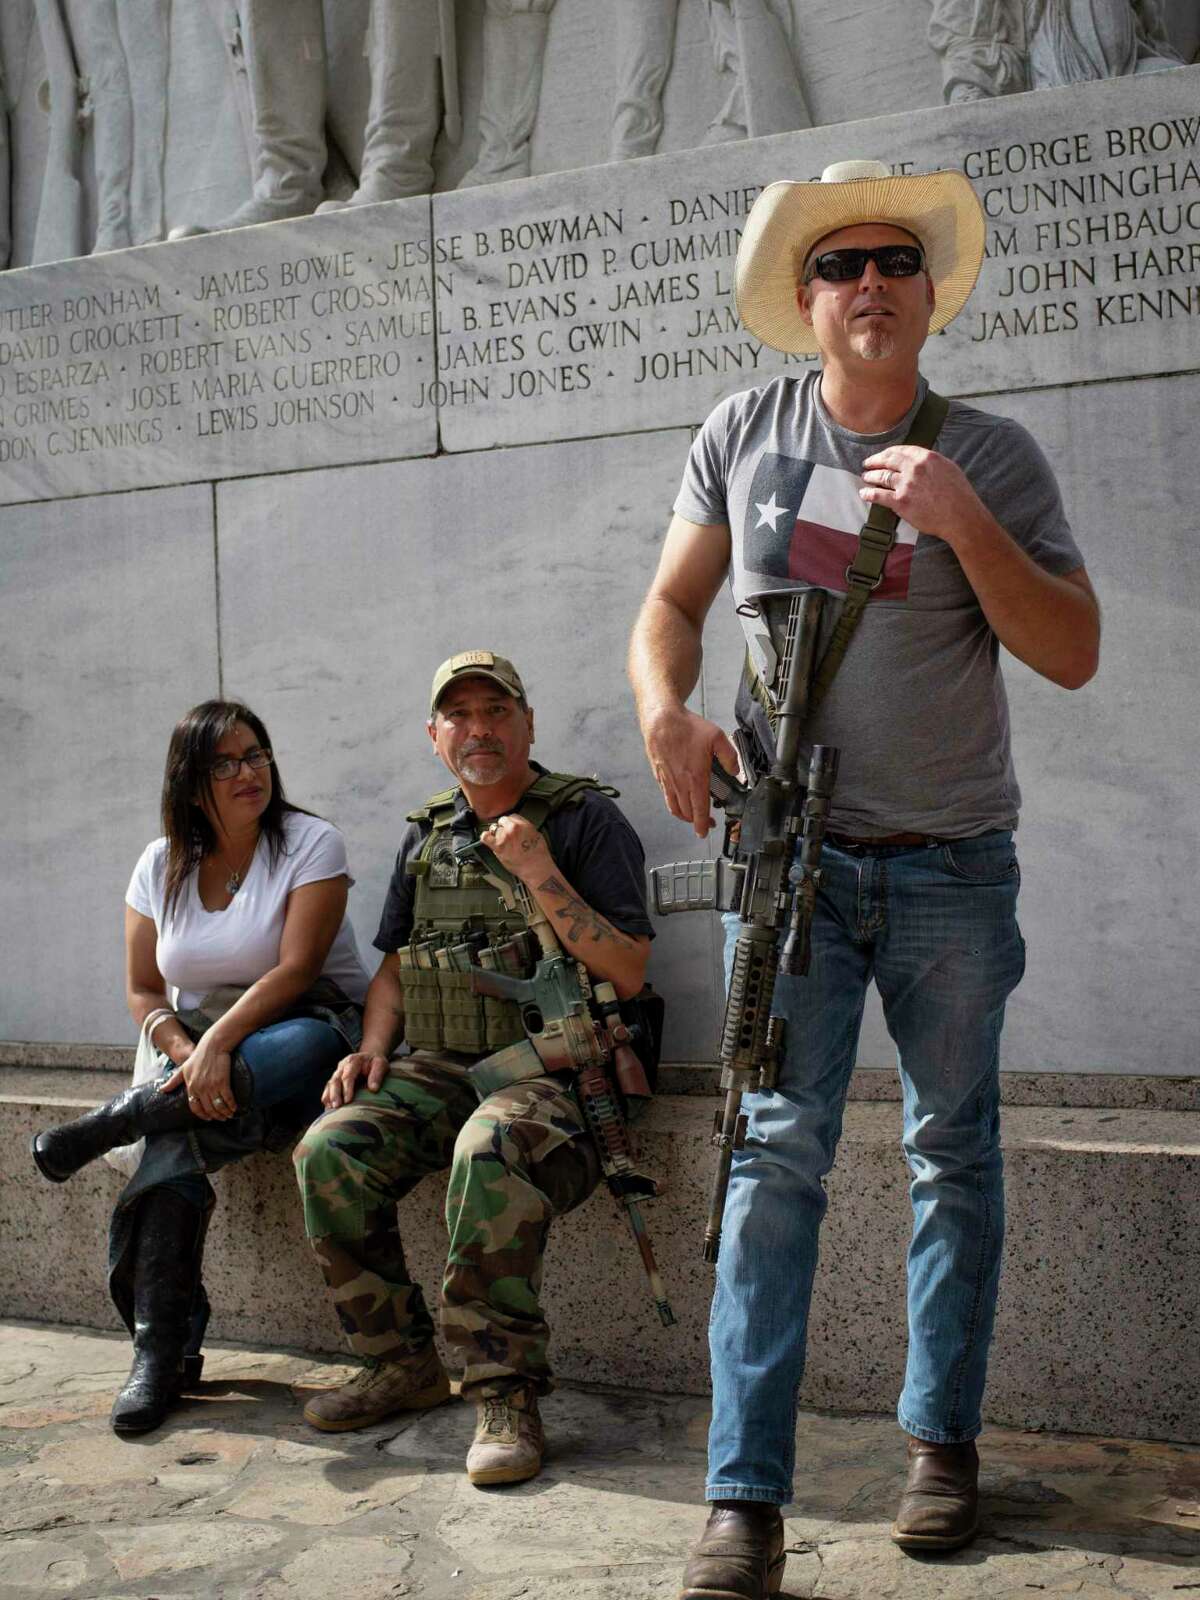 Corey Harris, right, and Carlos Soliz, center, participate in an occupation of the Alamo Cenotaph carrying rifles in an attempt to stop to the city of San Antonio from moving the historical monument on Friday, December 27, 2019. Members of This is Texas Freedom Force are opposing the planned moving of the Alamo Cenotaph by the city of San Antonio. ?’We?•re here today to occupy around the Cenotaph to stop any plans moving forward, trying to disassemble it and move it,?“ Brandon Burkhart, president of This is Texas Freedom Force (TITFF) said. TITFF is asking that Texas citizens be allowed to vote on the removal of the monument to the Battle of the Alamo and to those soldiers who died there, citing that the cost of movement and repair if it is damaged will cost Texas taxpayers.